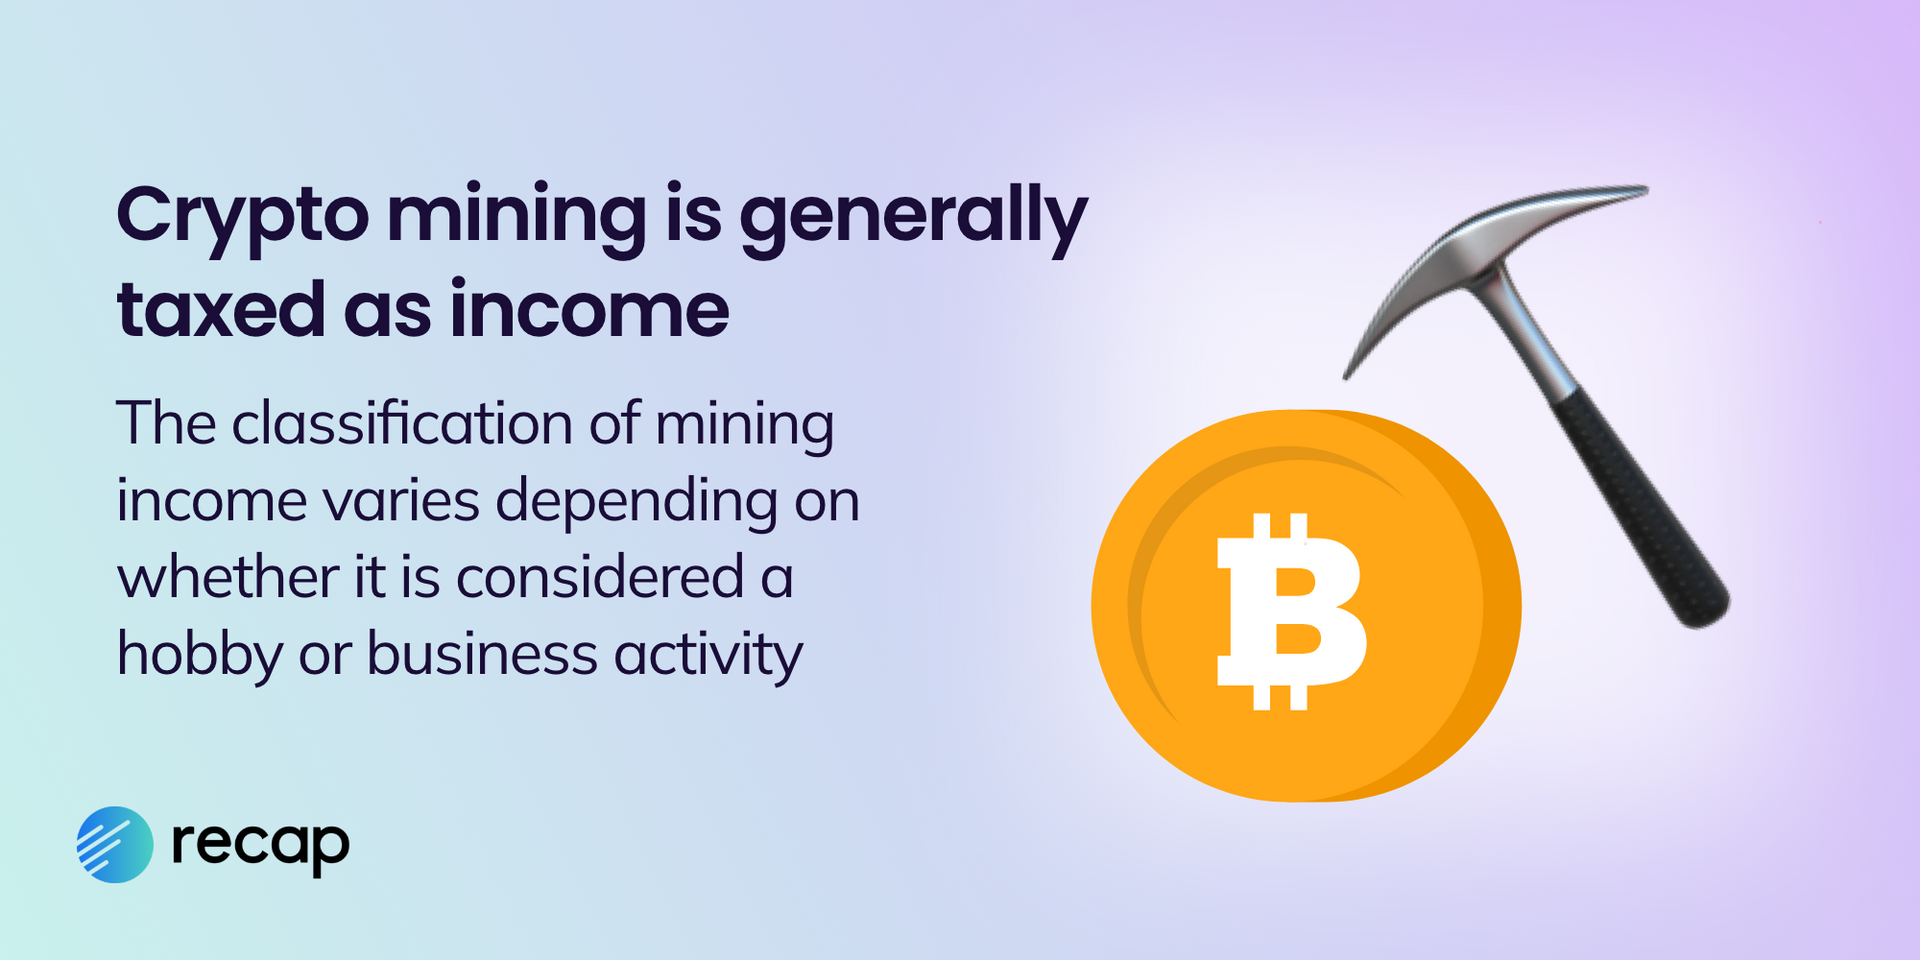 Infographic stating that crypto mining is generally taxed as income tax although the classification depends on whether it is considered a hobby or business activity